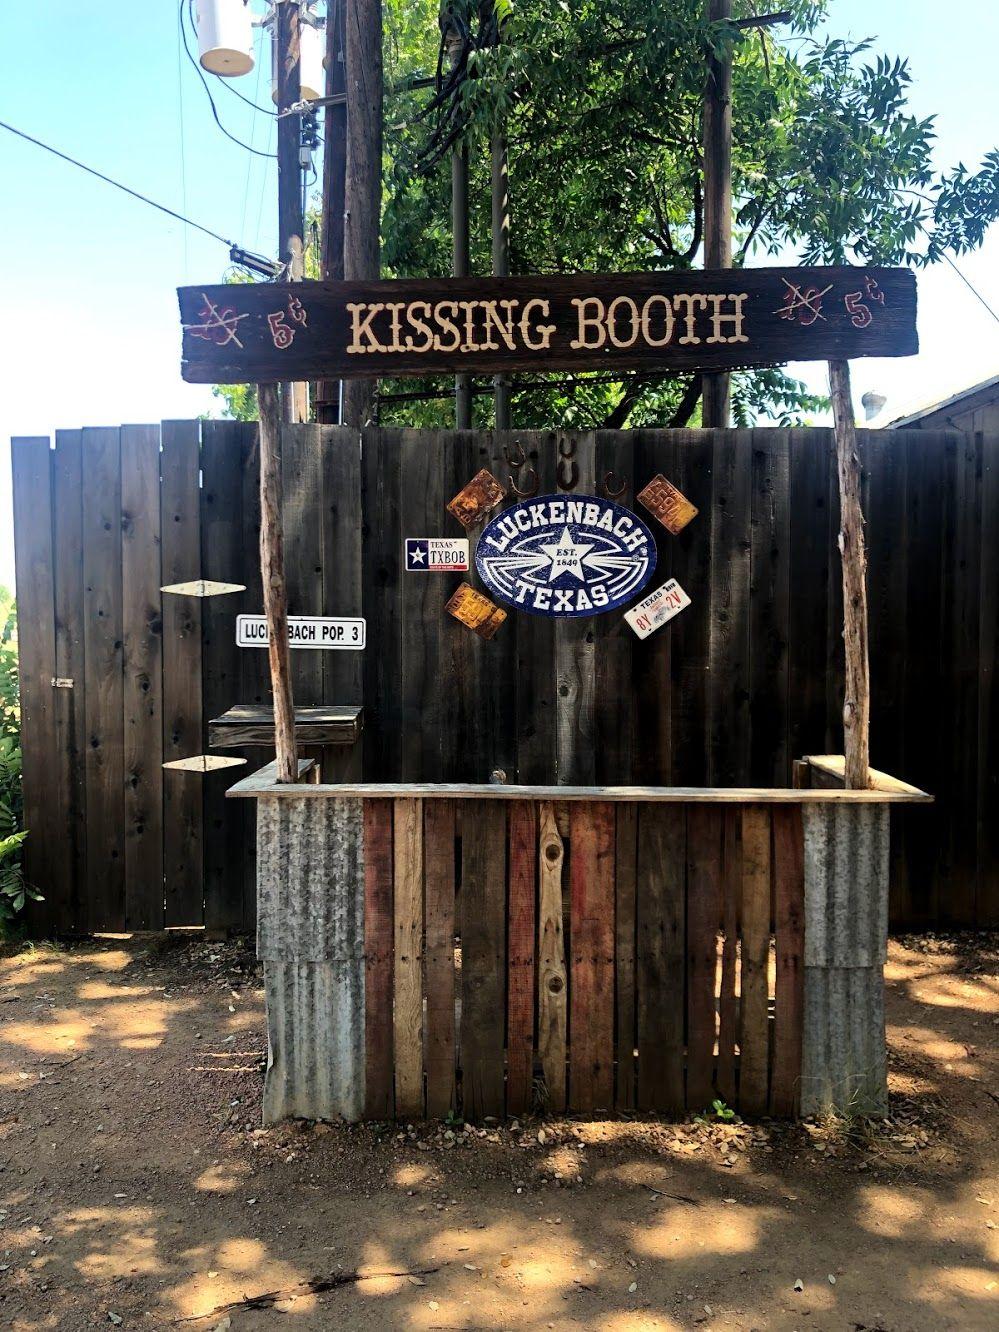 A wooden kissing booth structure in Luckenbach, Texas.